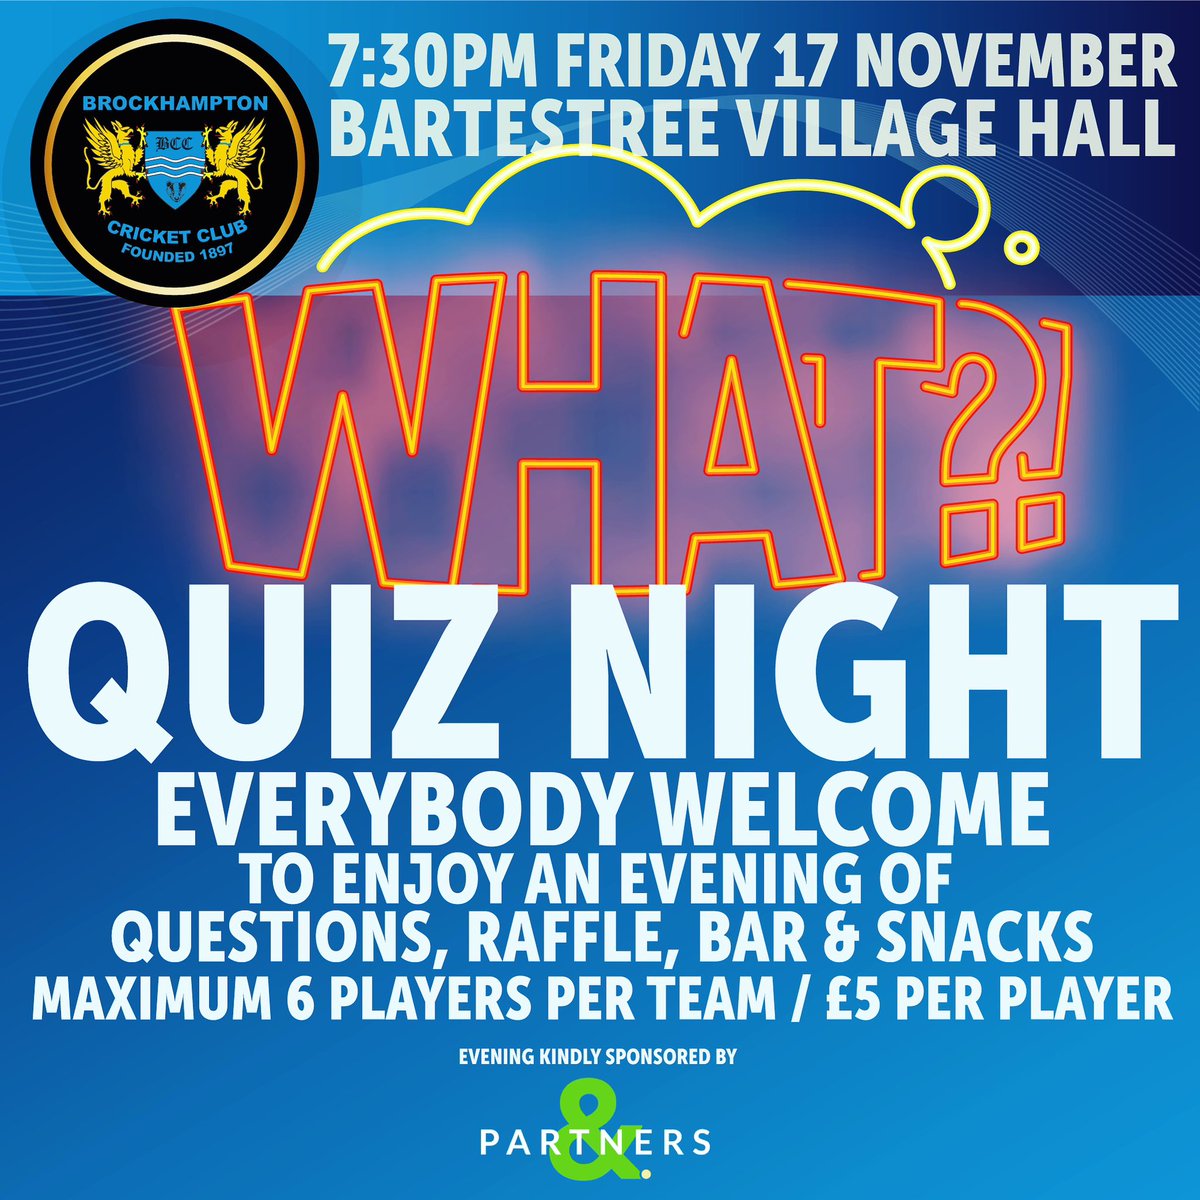 *BCC QUIZ & RAFFLE NIGHT* Please join us for what promises to be a fun evening of questions, prizes, snacks, drinks and answers. The evening will be hosted by a Welsh Cricket Legend. Maximum 6 players per team / £5 per person Many thanks to Partners&. for sponsoring the evening